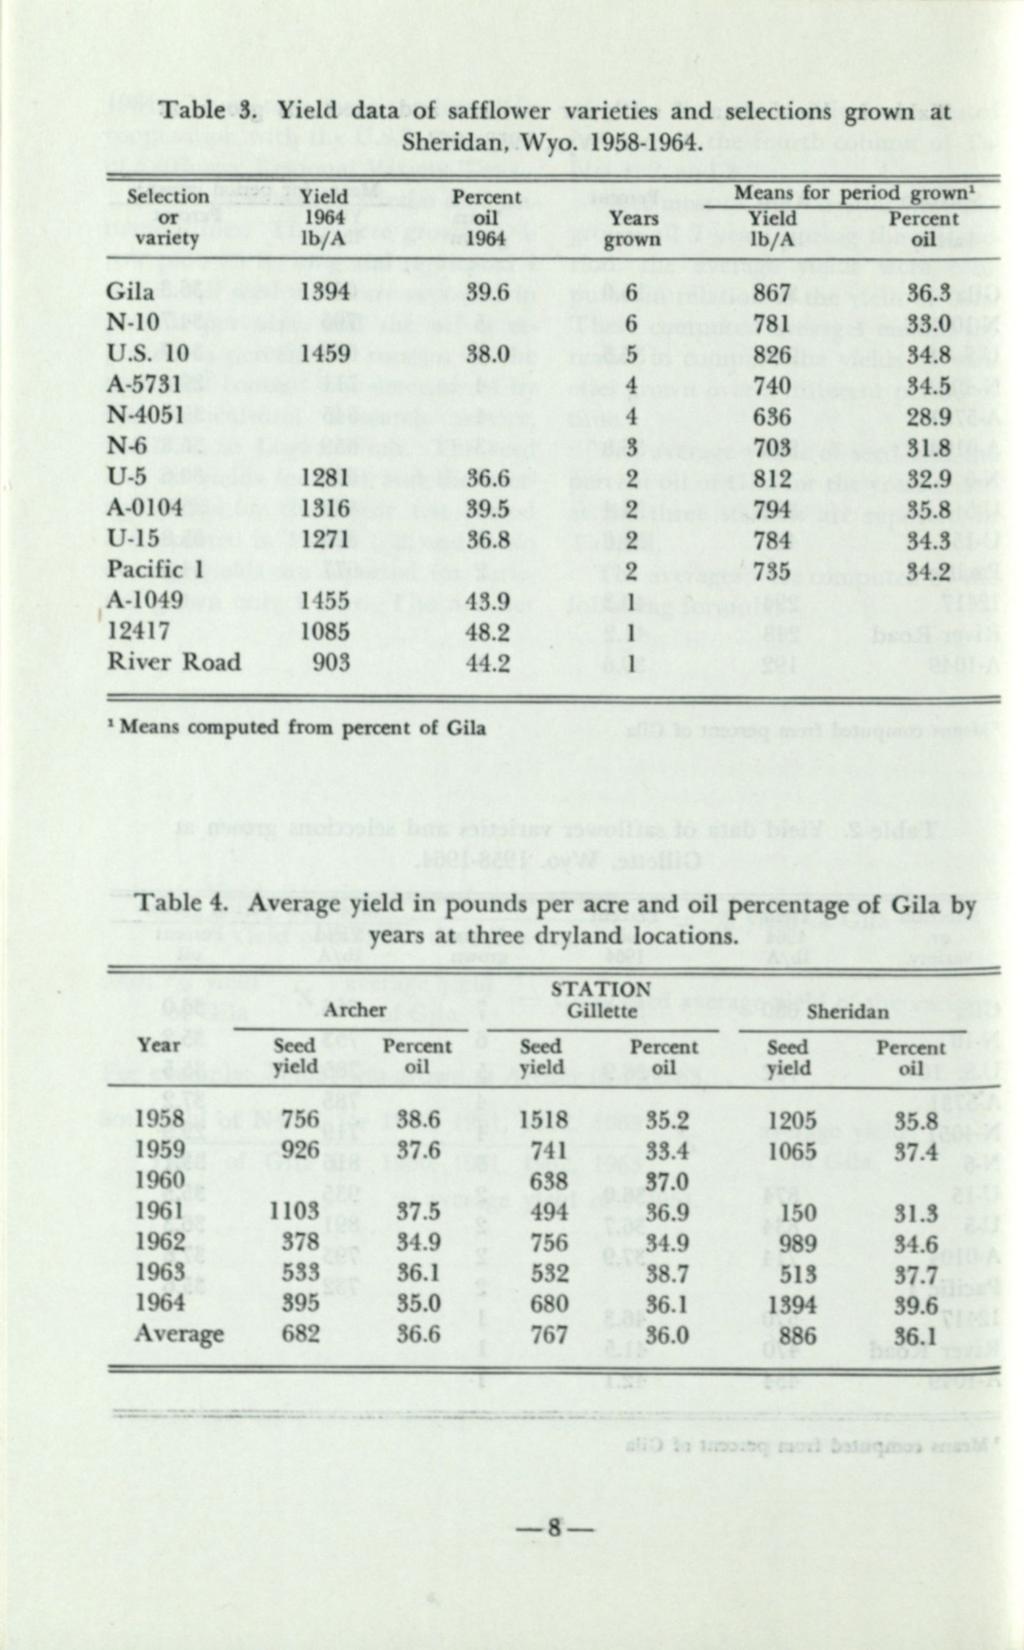 Table 3. Yield data of safflower varieties and selections grown at Sheridan, Wyo. 1958-1964.